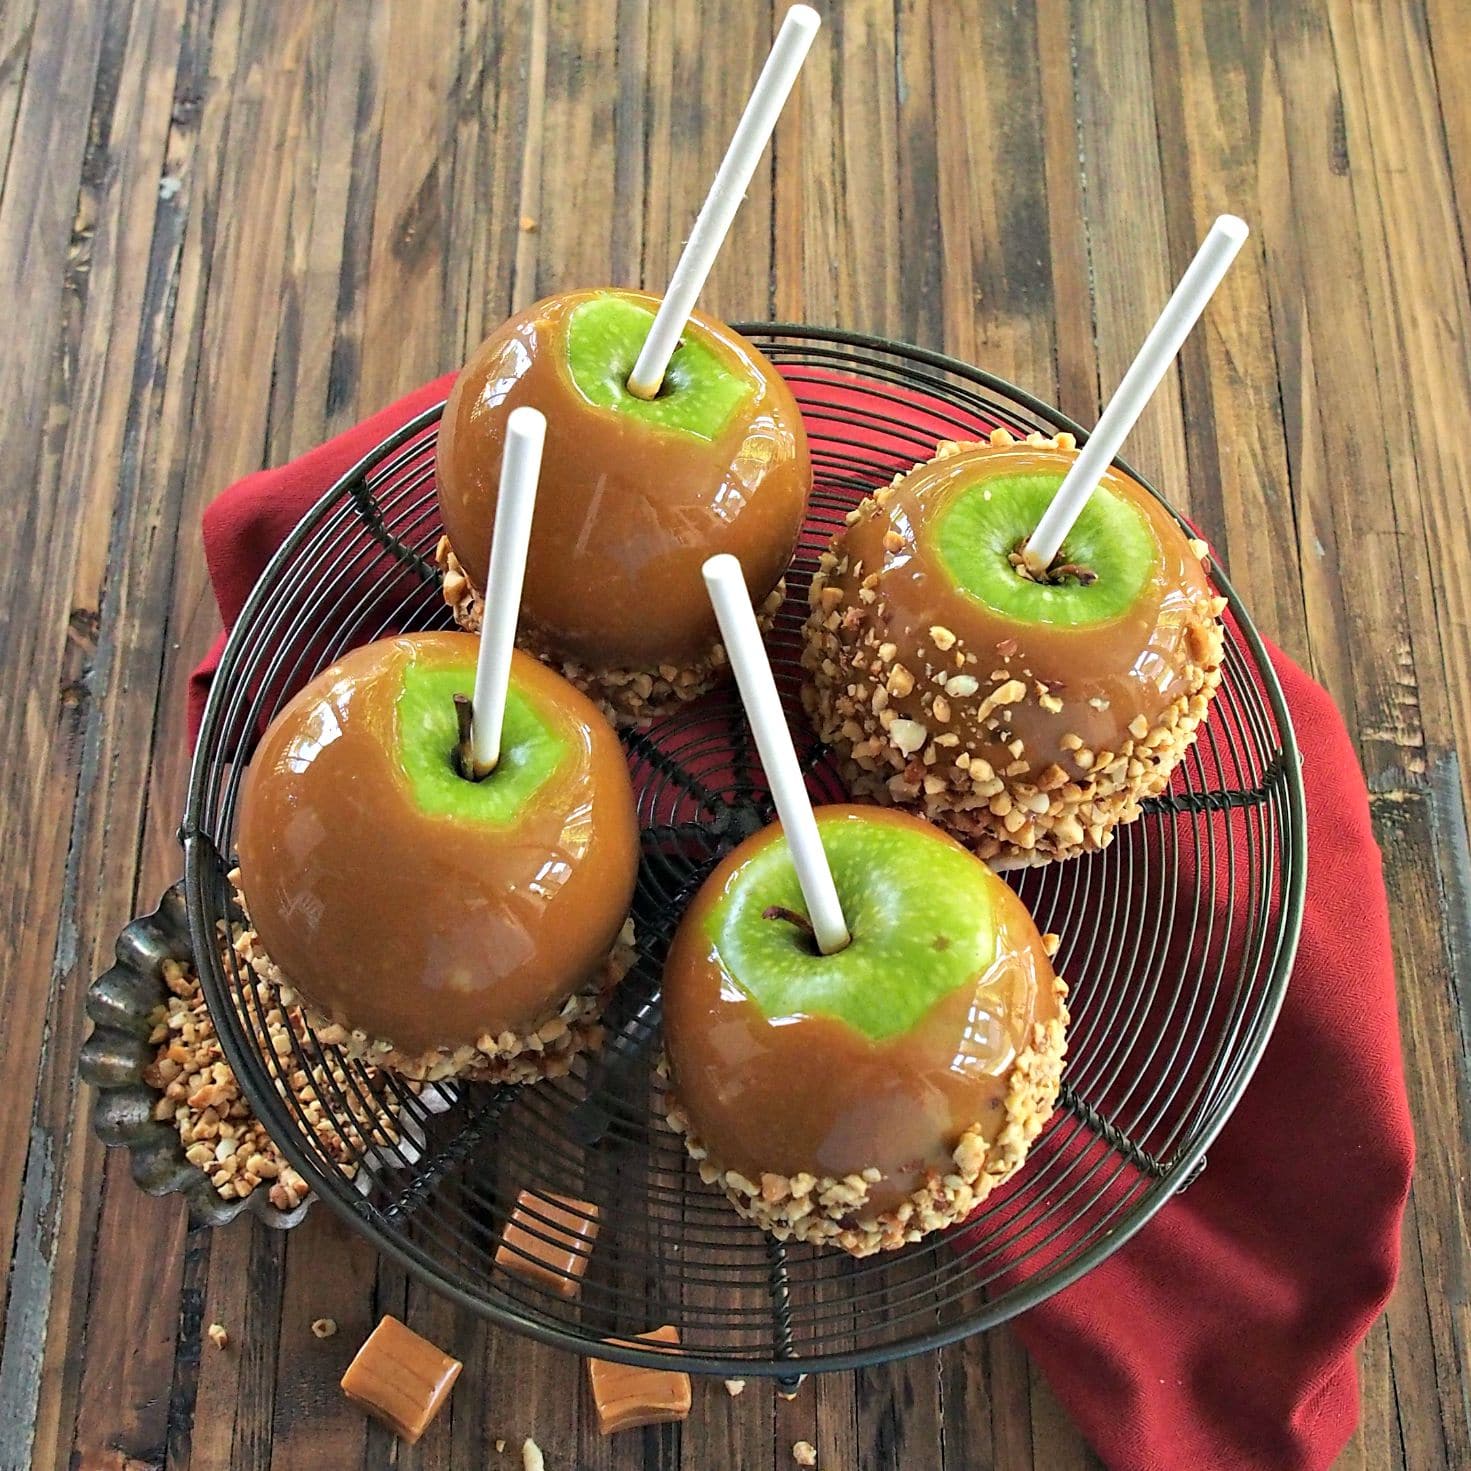 Classic Caramel Apples. Young or old - everyone's most-loved fall treat. Juicy, tart apples smothered in melted caramel then dipped in favorite toppings. Simply Sated